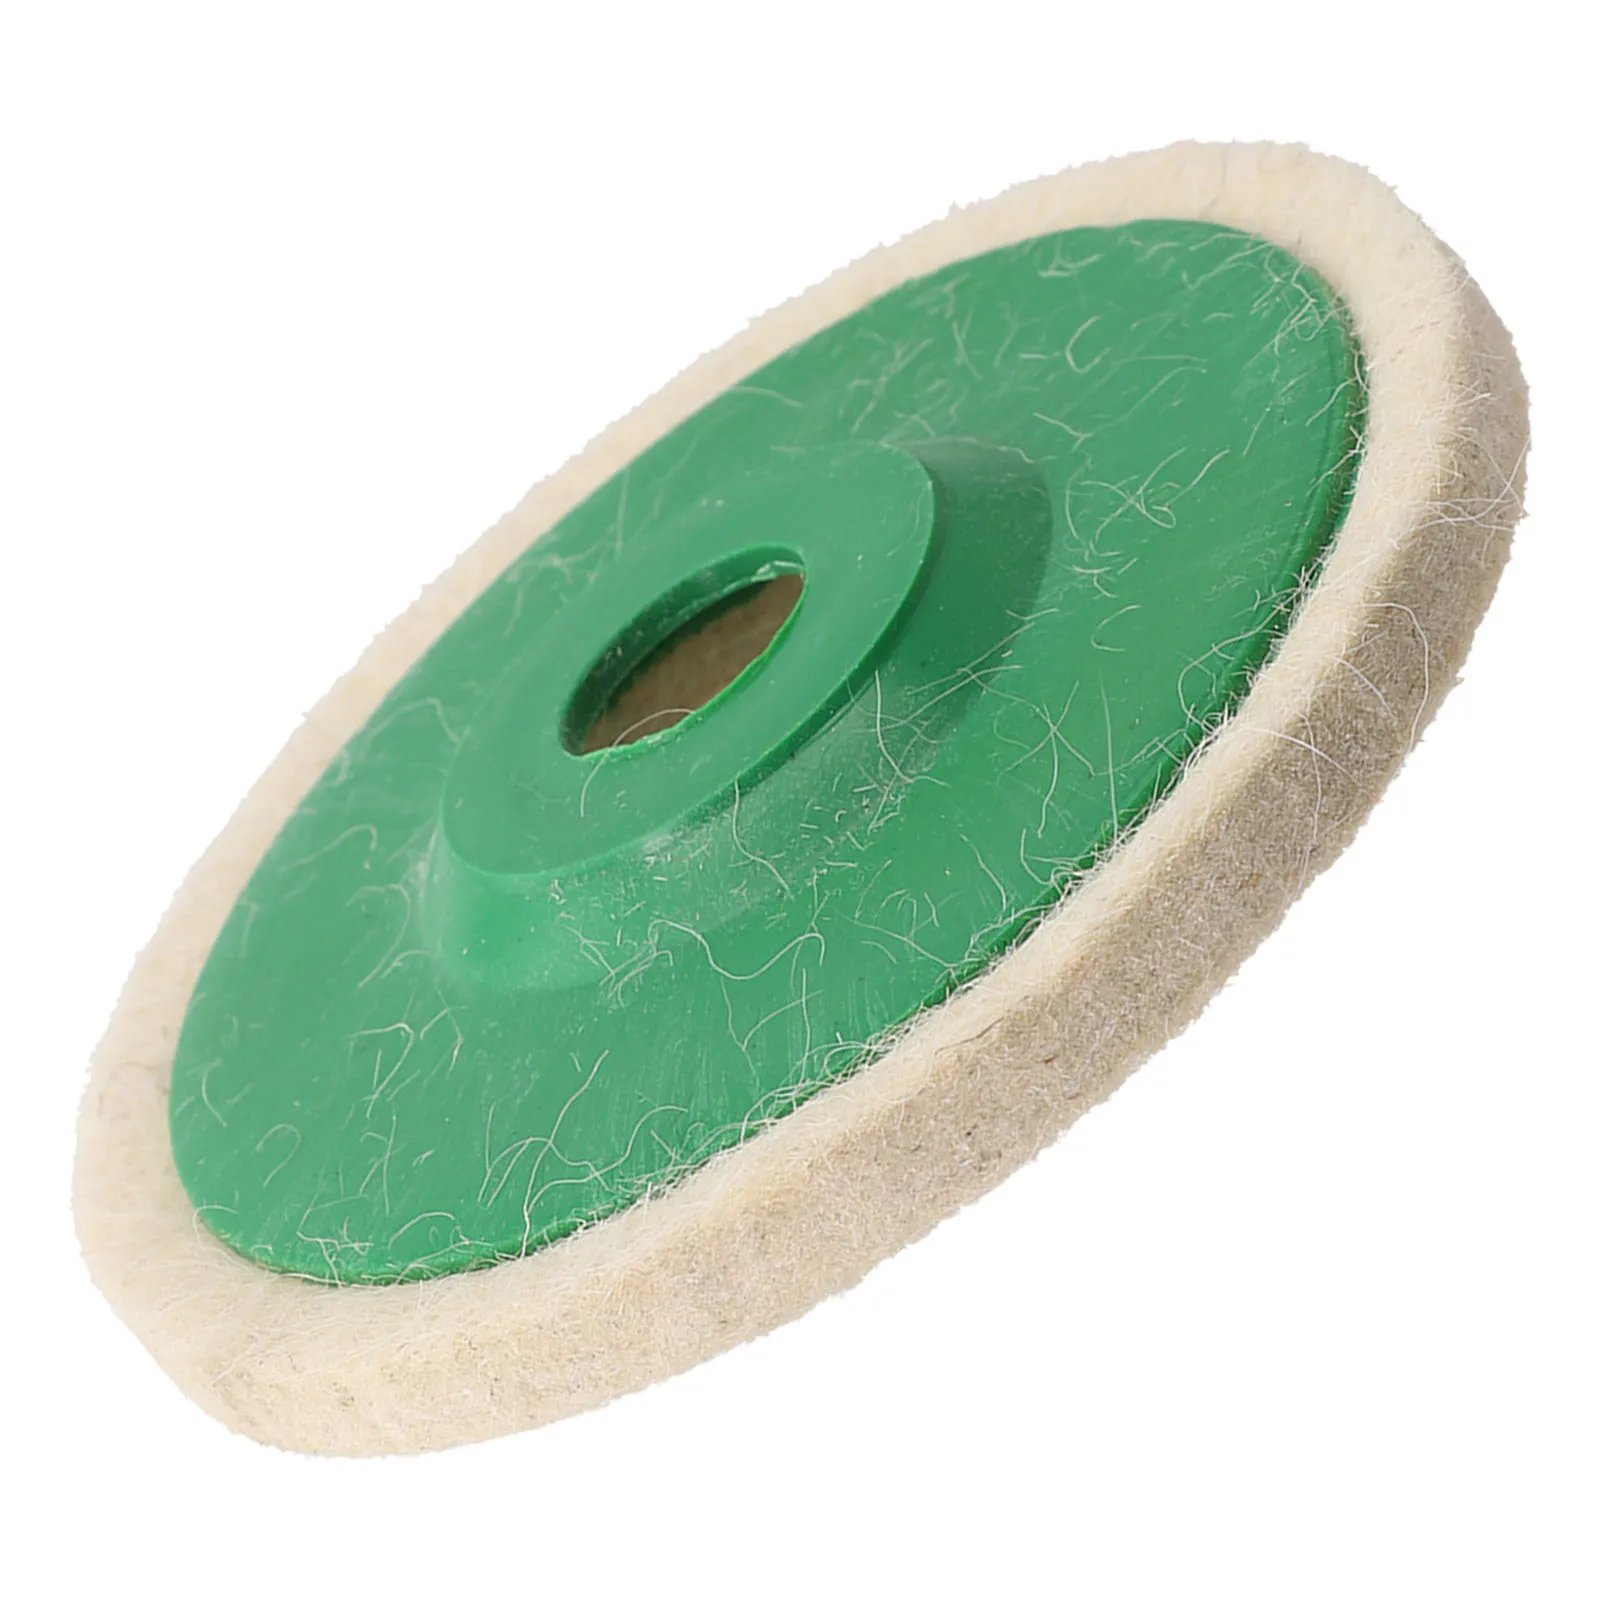 1 Pc 5Inch Wool Polishing Wheels Buffing Pads Angle Grinder Accessories Grinding Disc For Metal Glass Ceramic Polishing Tools 33pcs diameter grinding wool polishing pads dremel accessories felt buffing wheel 3 2 mm discs shanks 30 8mm 25 7mm 13 7mm